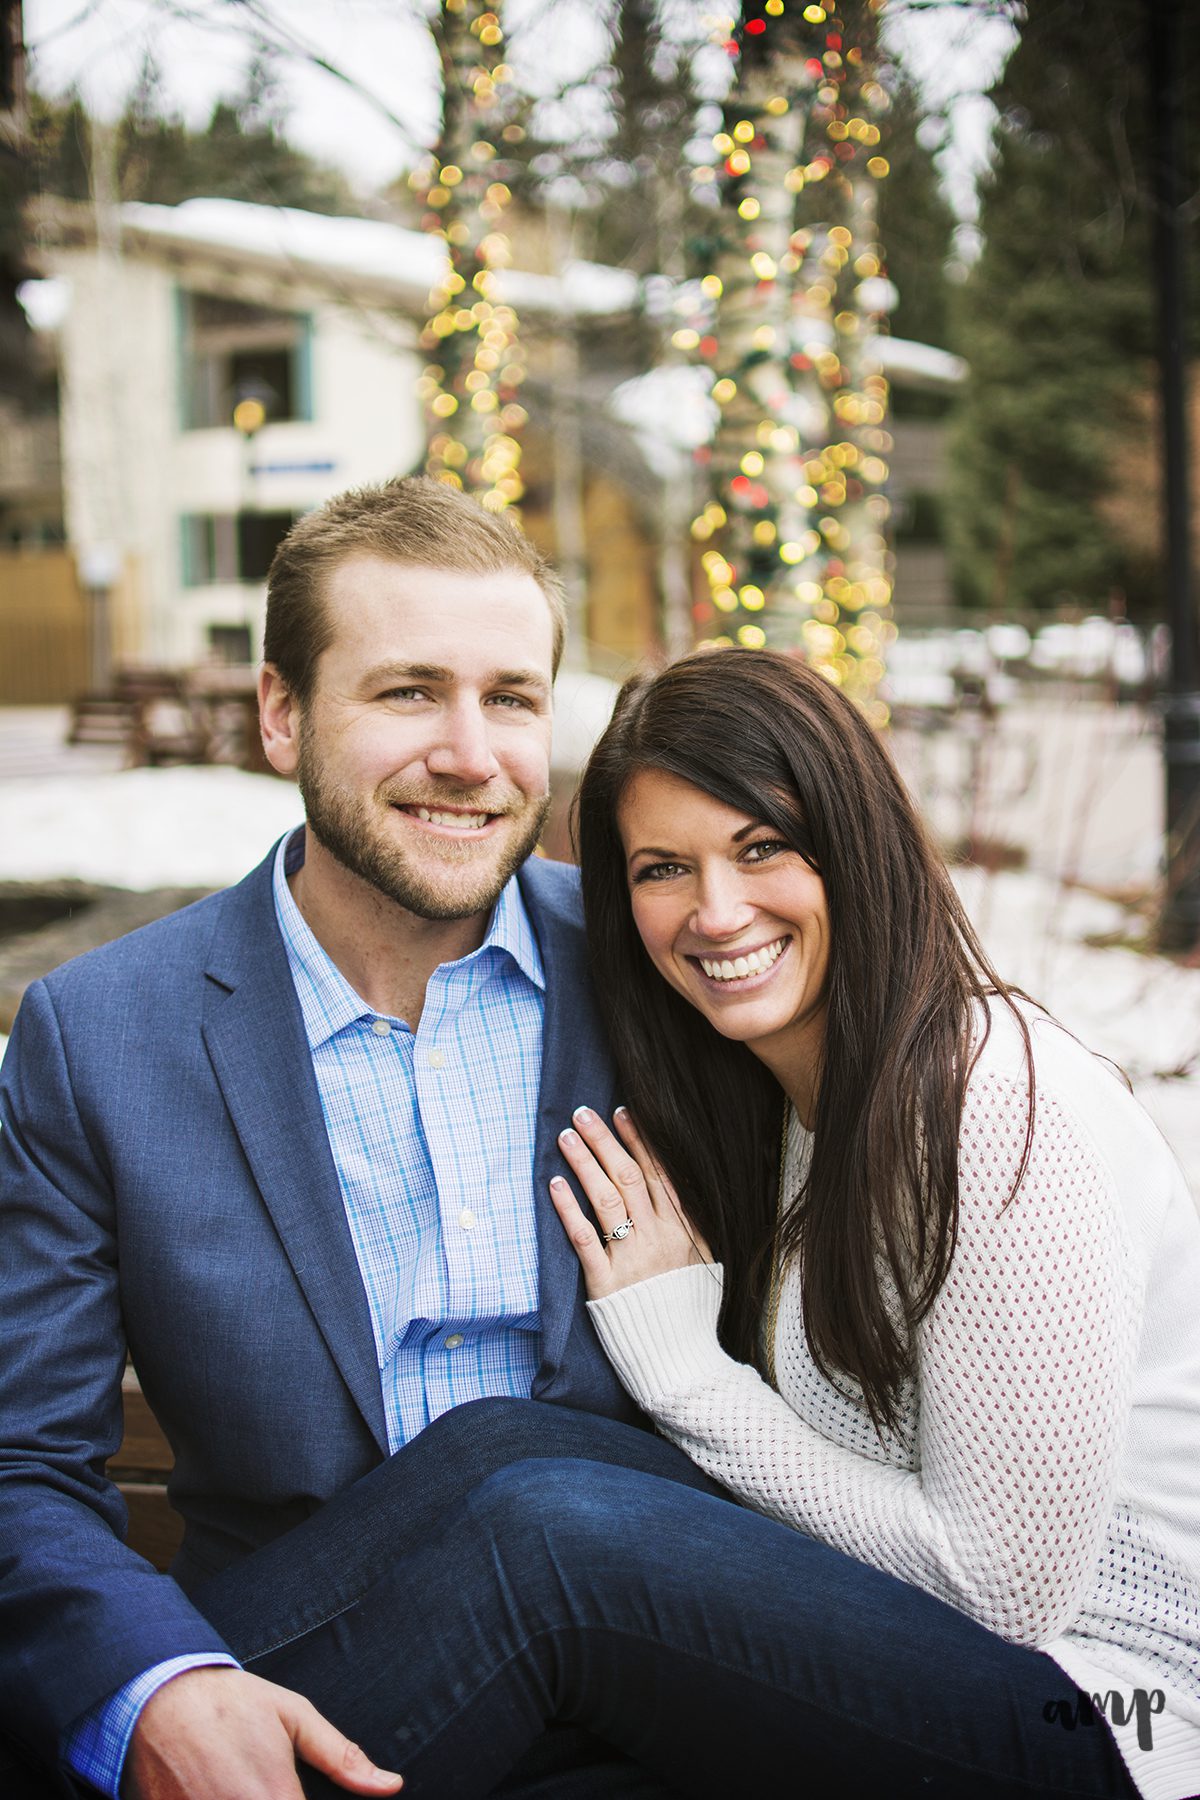 Vail Village in winter | Vail Engagement photographer